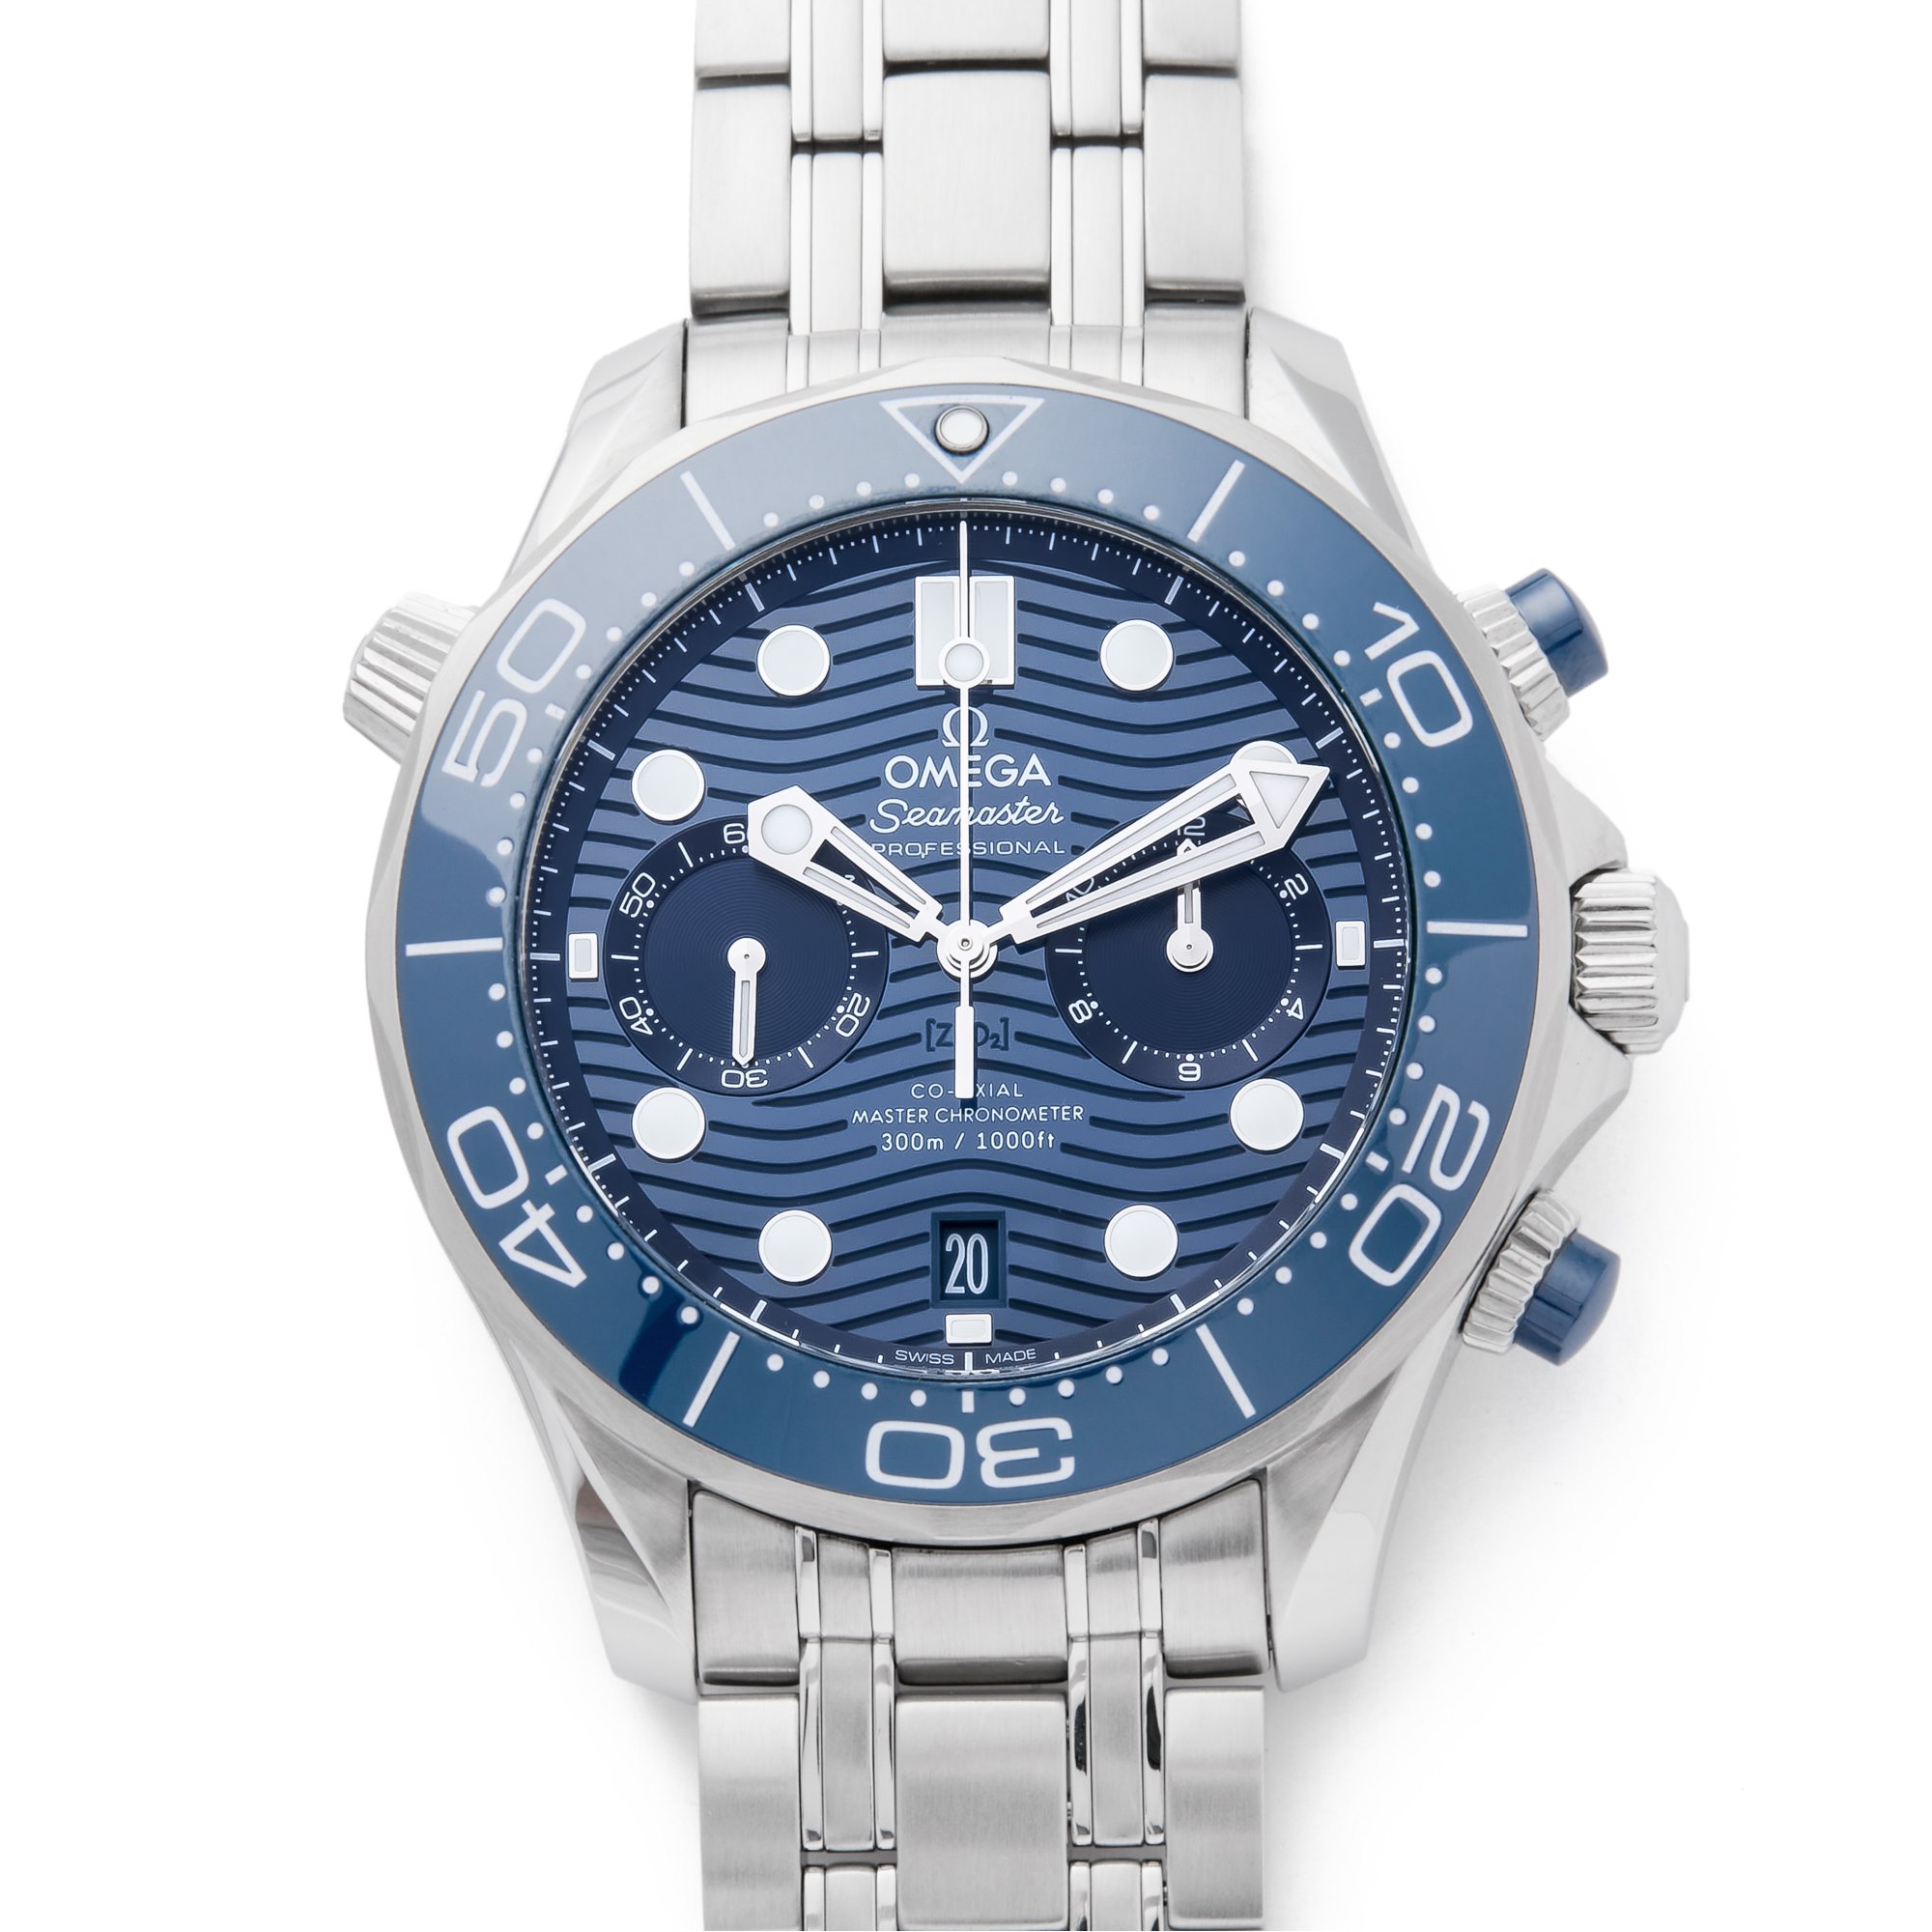 Omega Seamaster Chronograph Stainless Steel 210.30.44.51.03.001